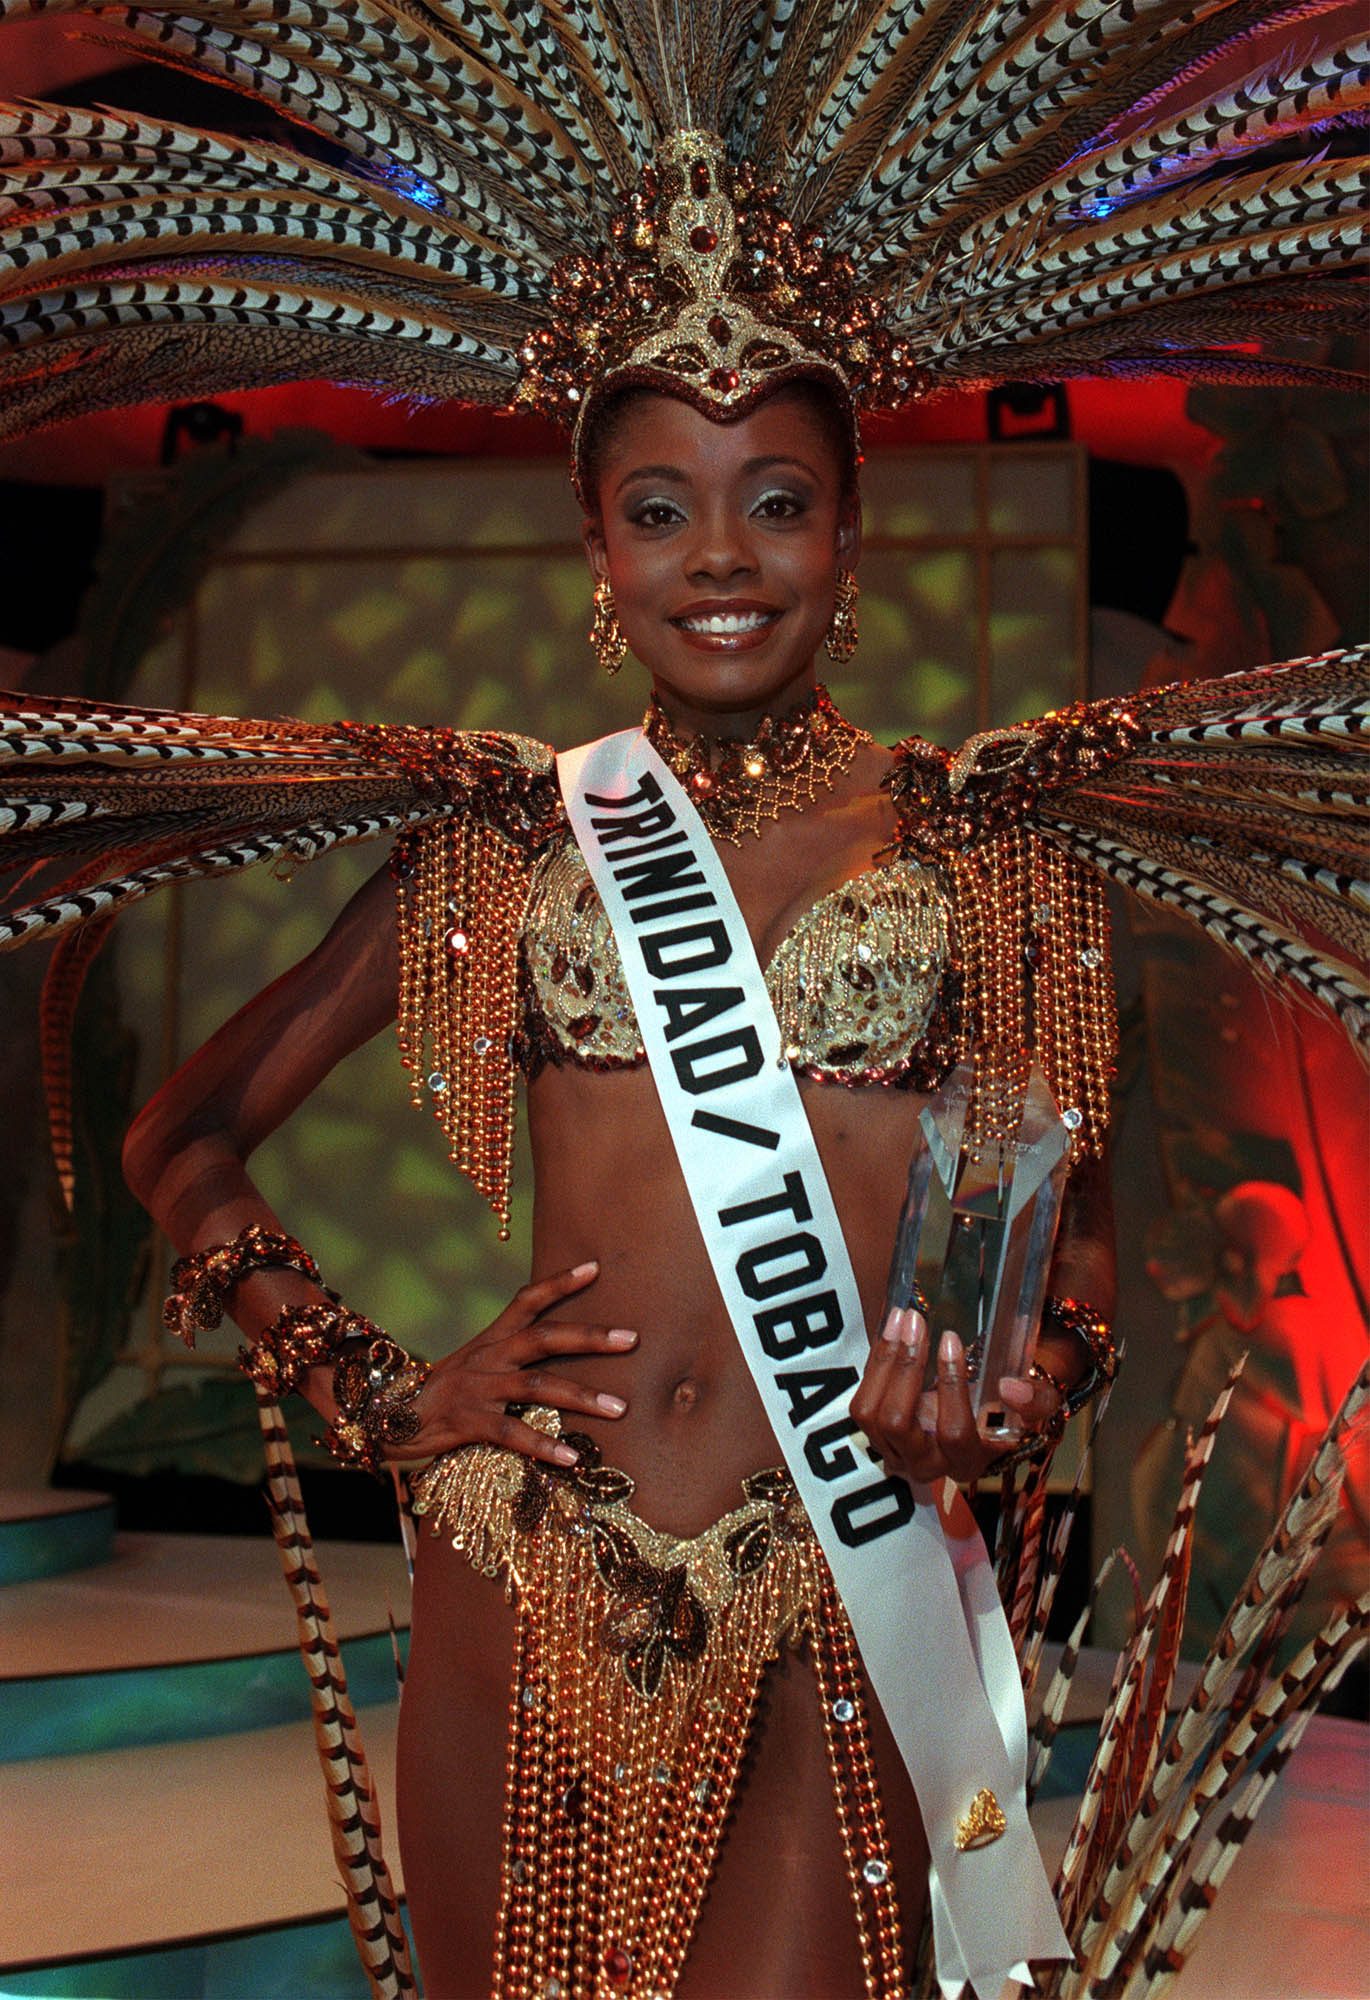 Wendy Fitzwilliam, MISS TRINIDAD & TOBAGO 1998, wins Best in National Costume Award May 7, 1998 from Honolulu, Hawaii chosen by a panel of Hawaiian based judges. Fitzwilliam said the costume, entitled "Freedom" , represents the spirit of her people and a cry of hope. The prize includes $1,000 cash and commemorative Hoya Crystal Trophy.  Photo from the Miss Universe Organization 